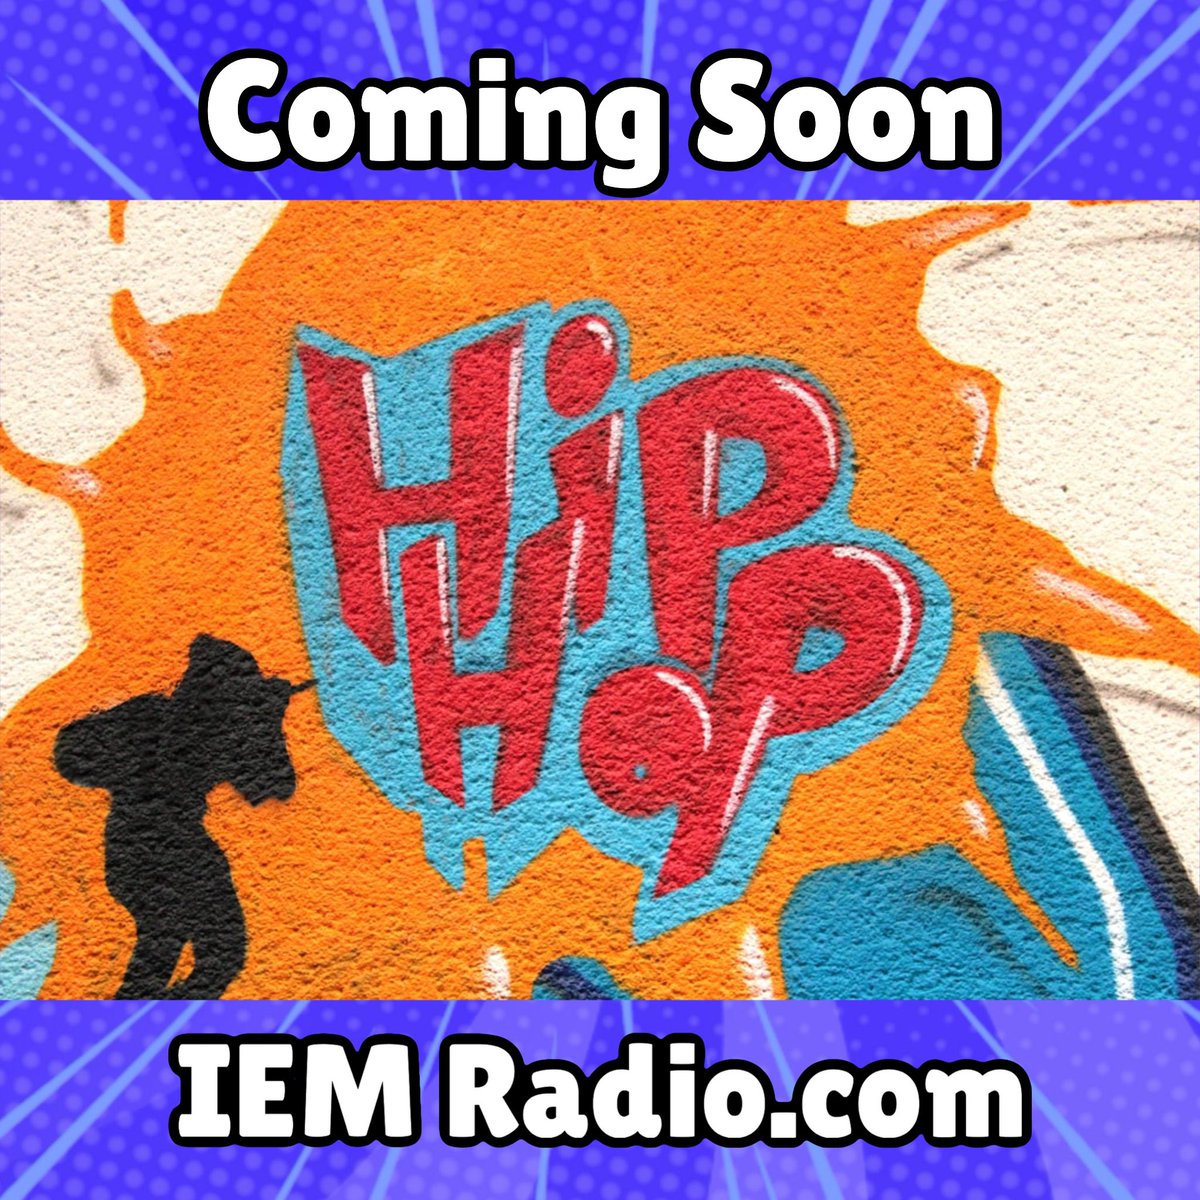 Coming soon to IEM Radio! I’m going to have monthly segments featuring underground hip hop music. That’s are some great tracks playing now on the station but I’ll have a dedicated show playing more. Looking to submit? Check out the next post. Follow: @IEMRadio23